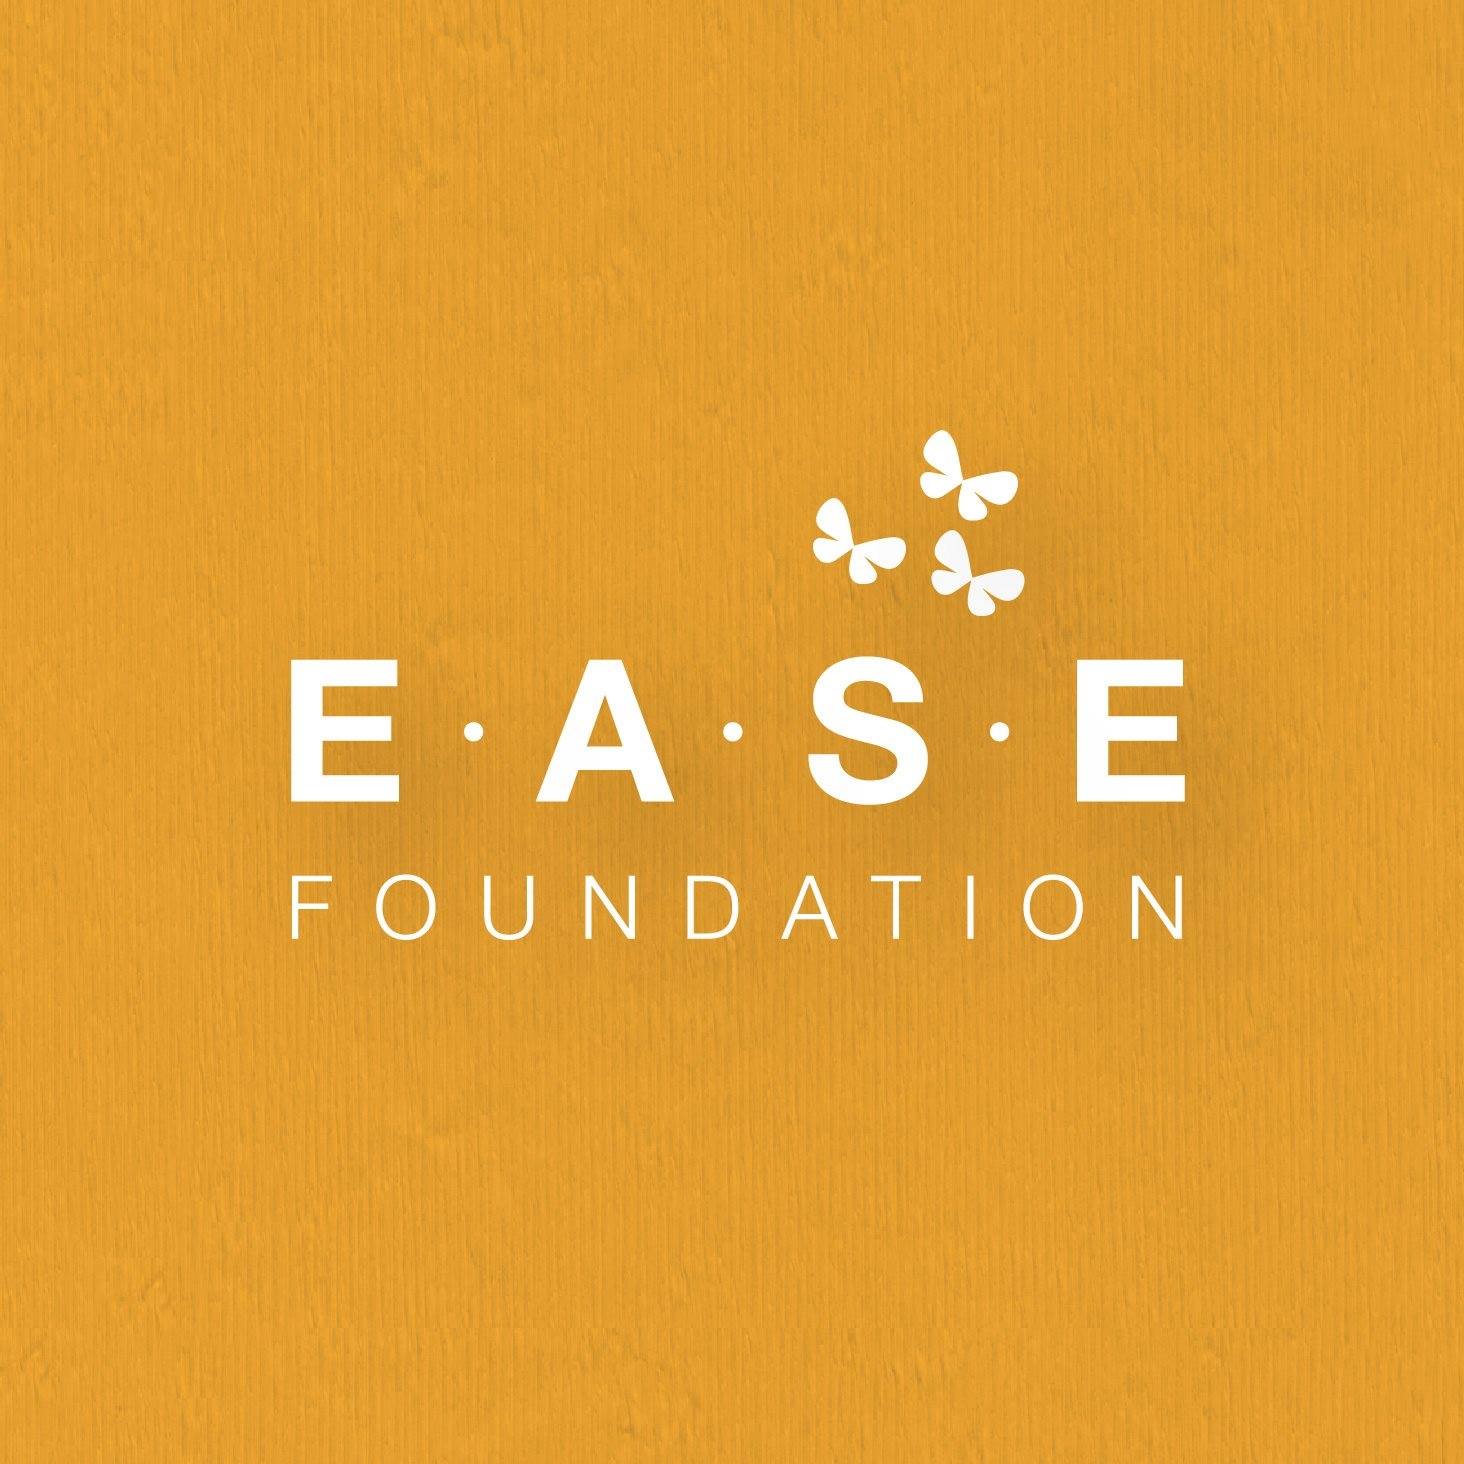 Ease Foundation - Emergency Assistance